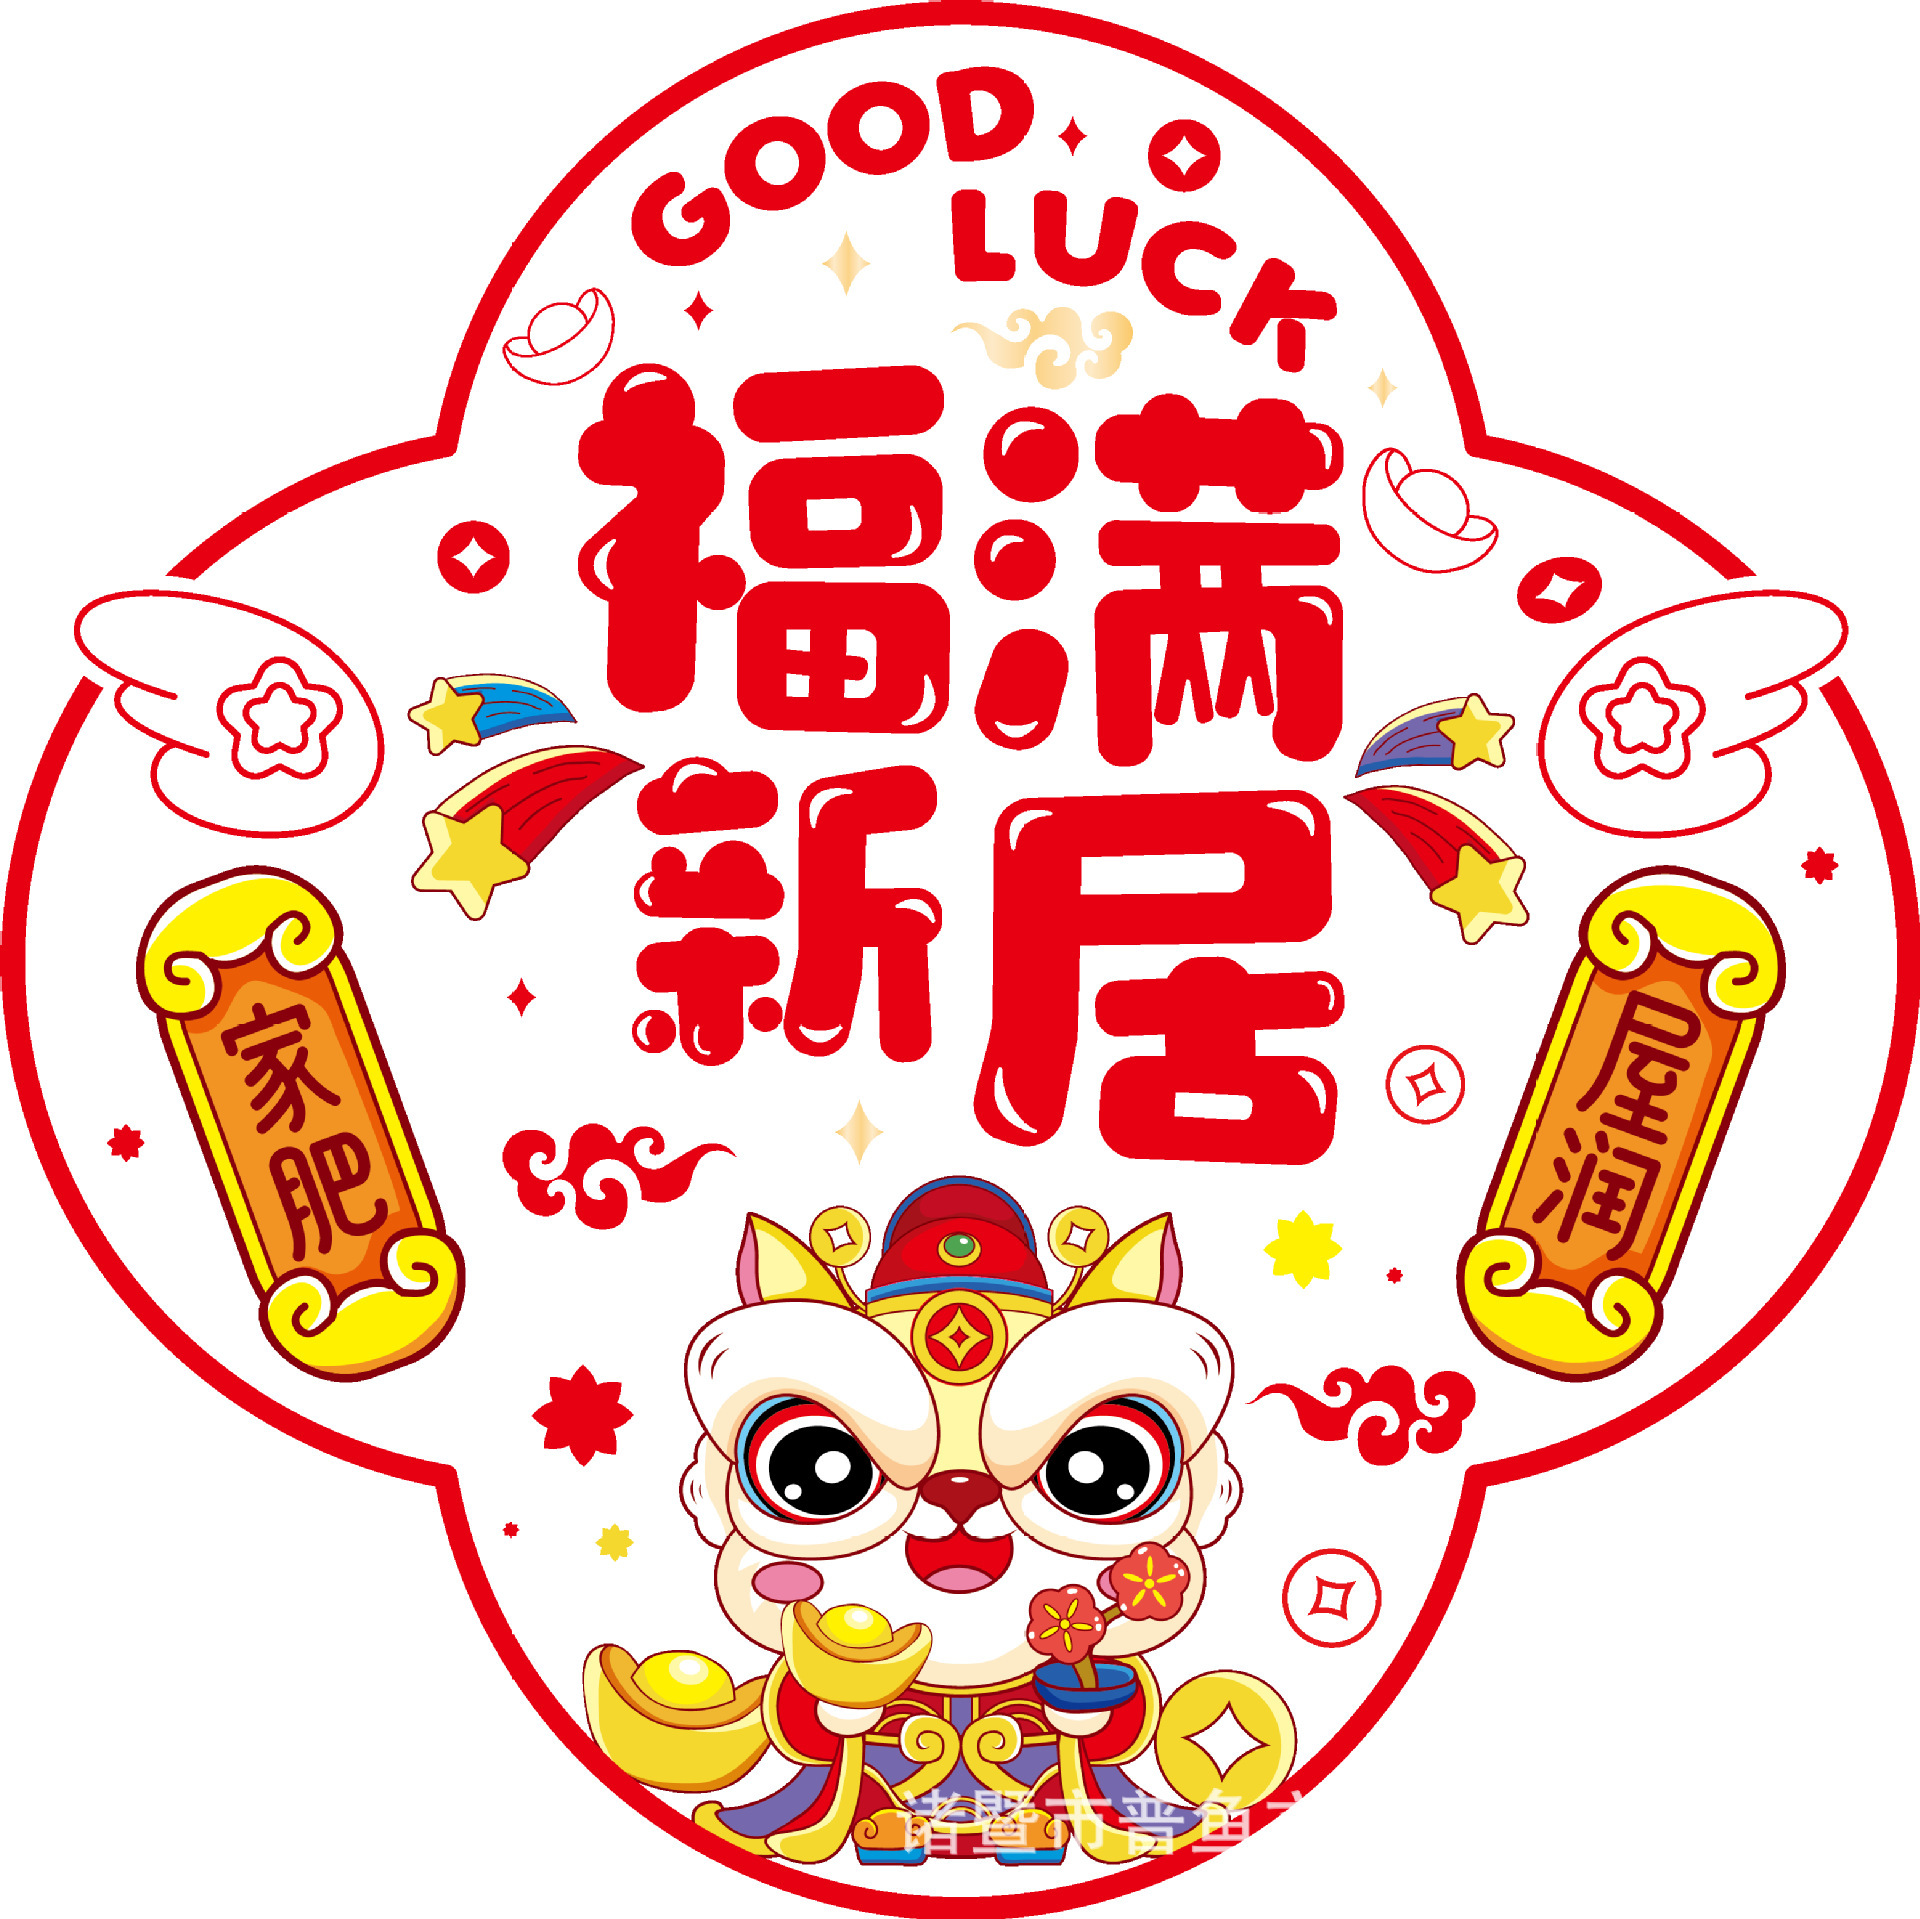 Qiaozhixi Decoration Double-Sided Paper-Cut for Window Decoration Static Sticker Fu Character Glass Door Window Stickers Paper-Cut New Home Layout Moving House